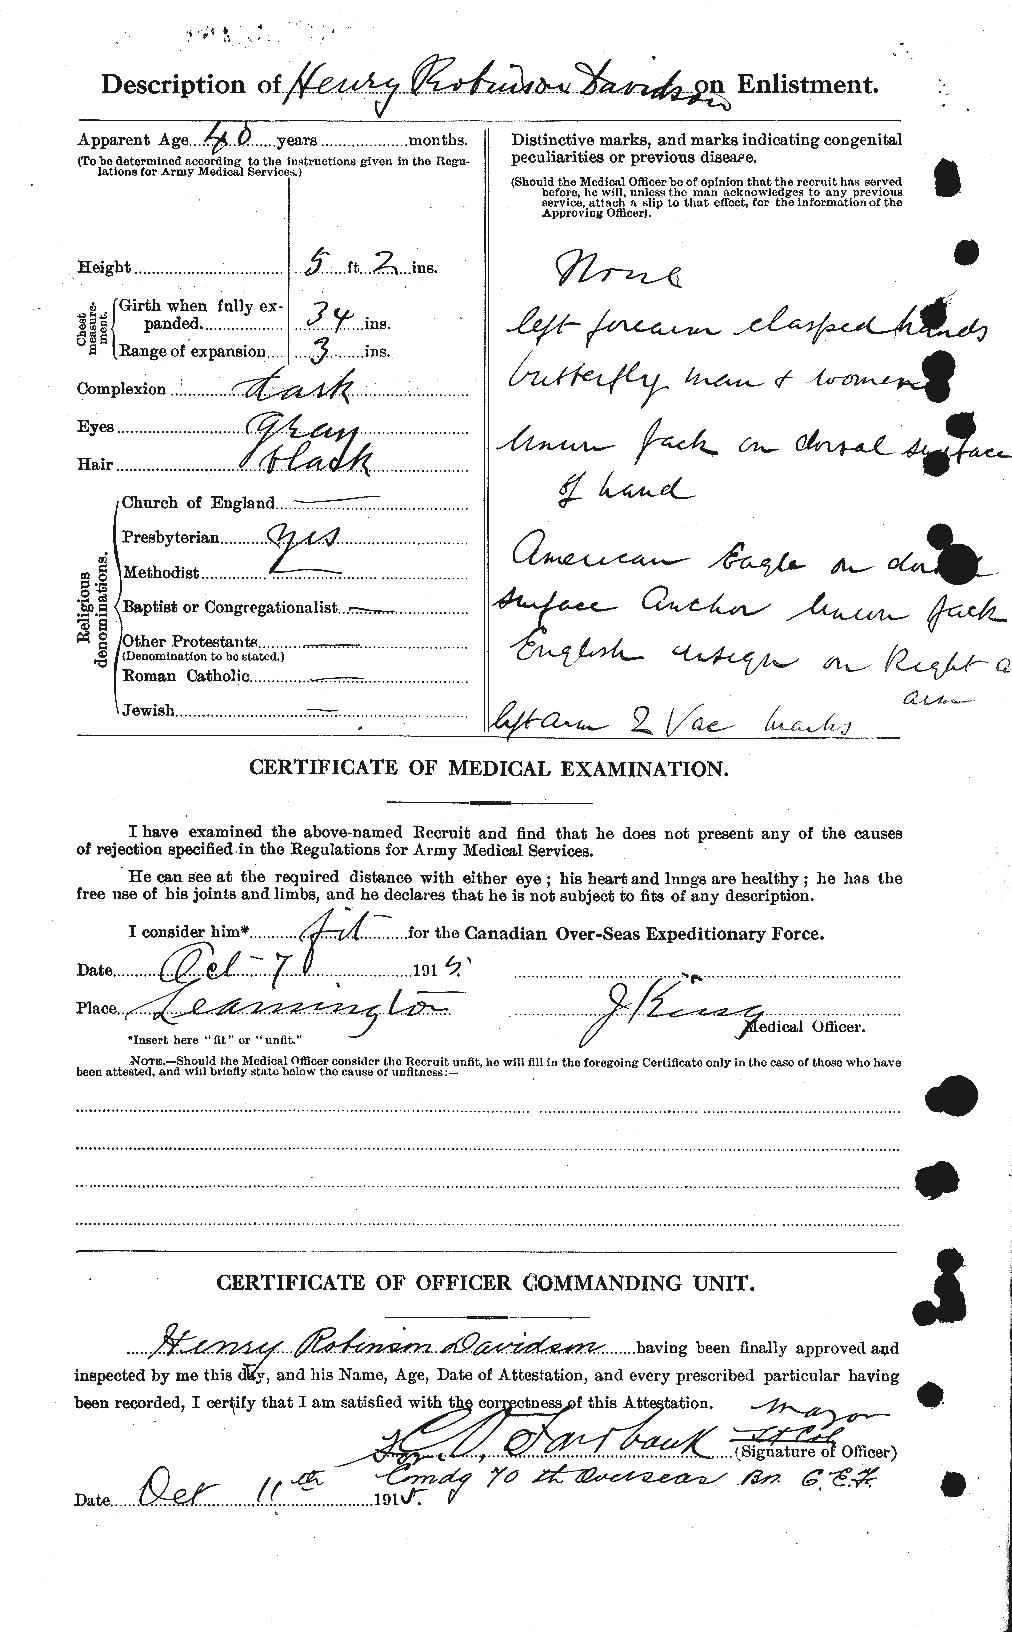 Personnel Records of the First World War - CEF 281200b